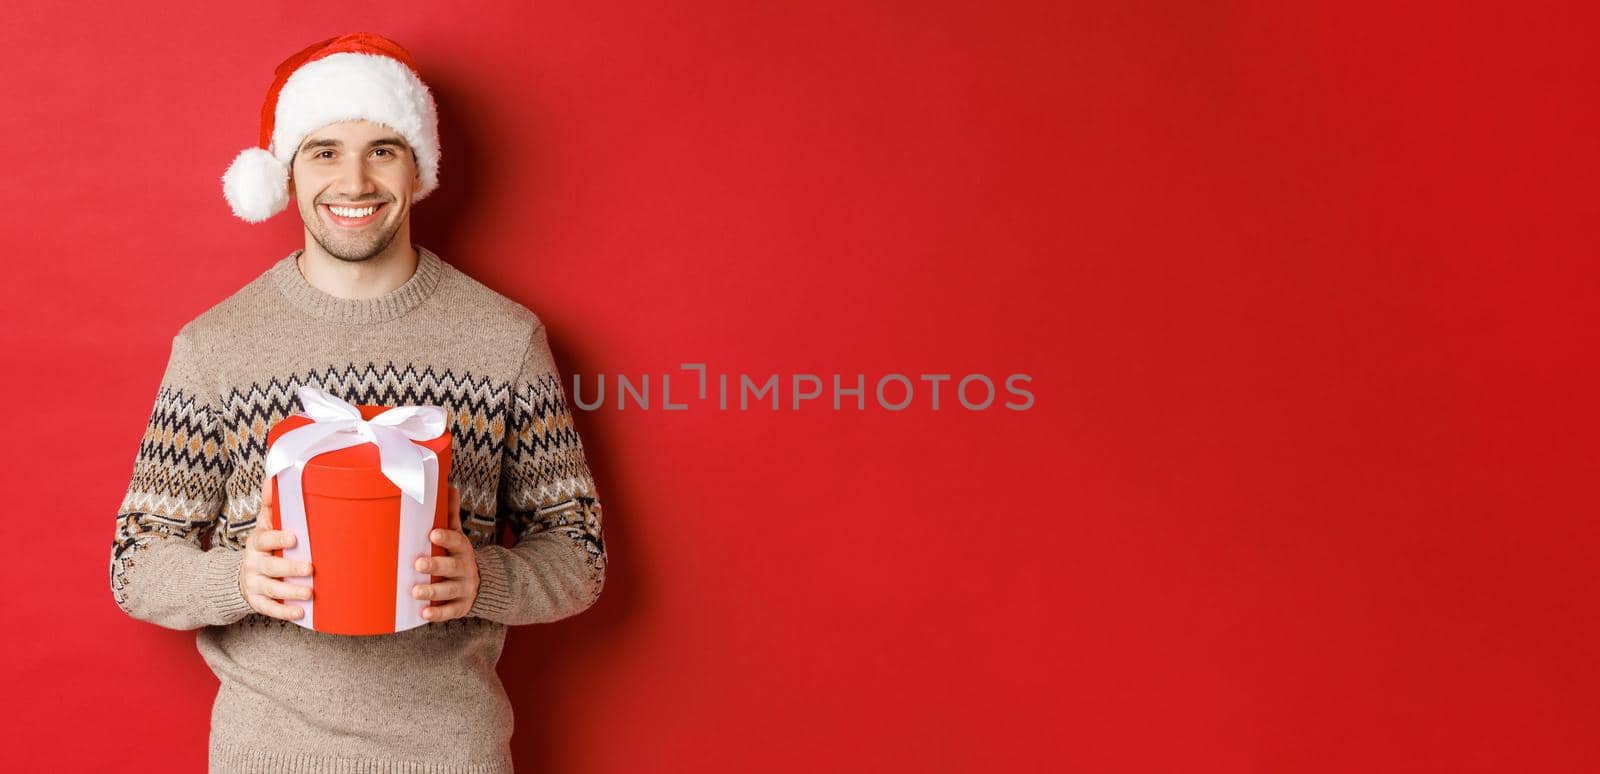 Portrait of handsome man holding a present, wishing happy holiday, standing in santa hat and christmas sweater against red background.